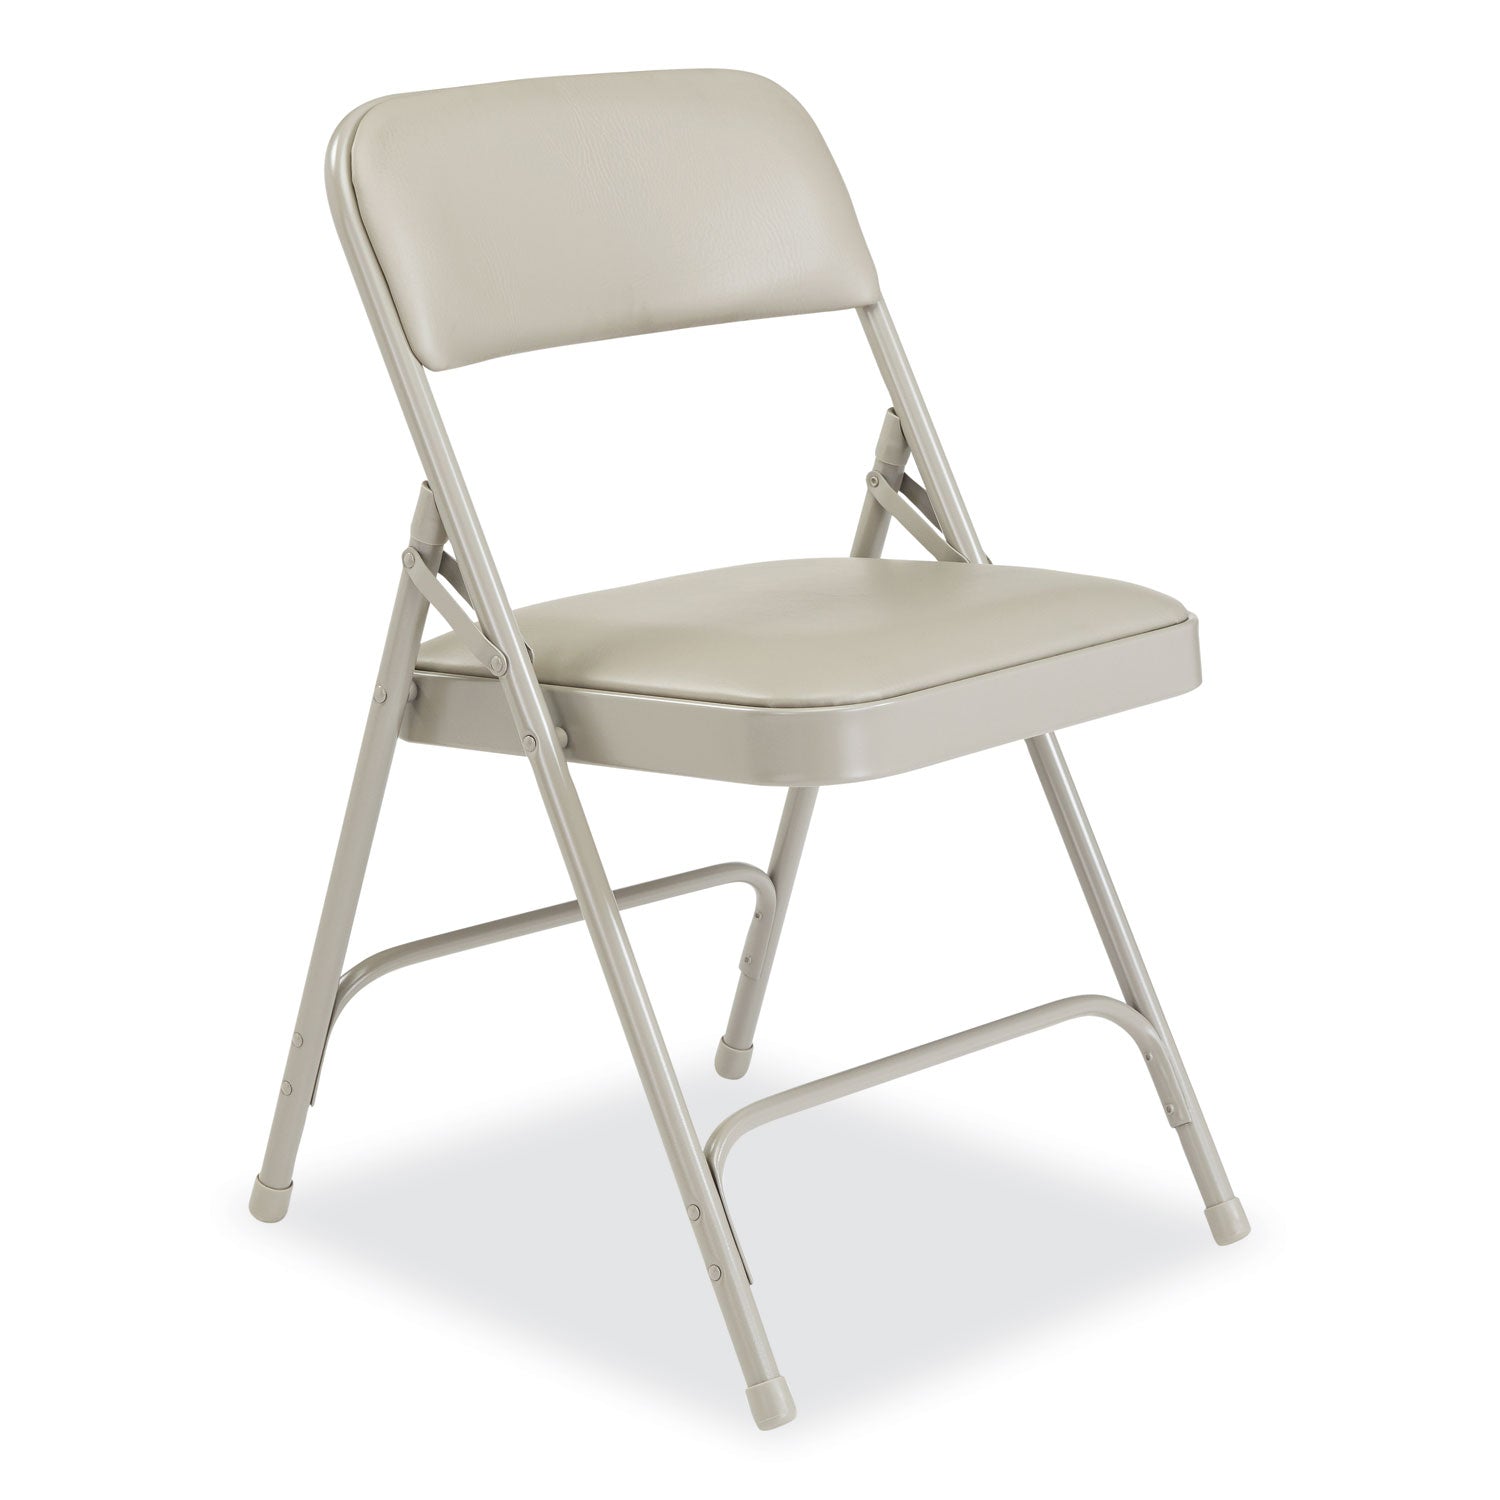 1200-series-premium-vinyl-dual-hinge-folding-chair-supports-500lb-1775-seat-height-warm-gray-4-ctships-in-1-3-bus-days_nps1202 - 2